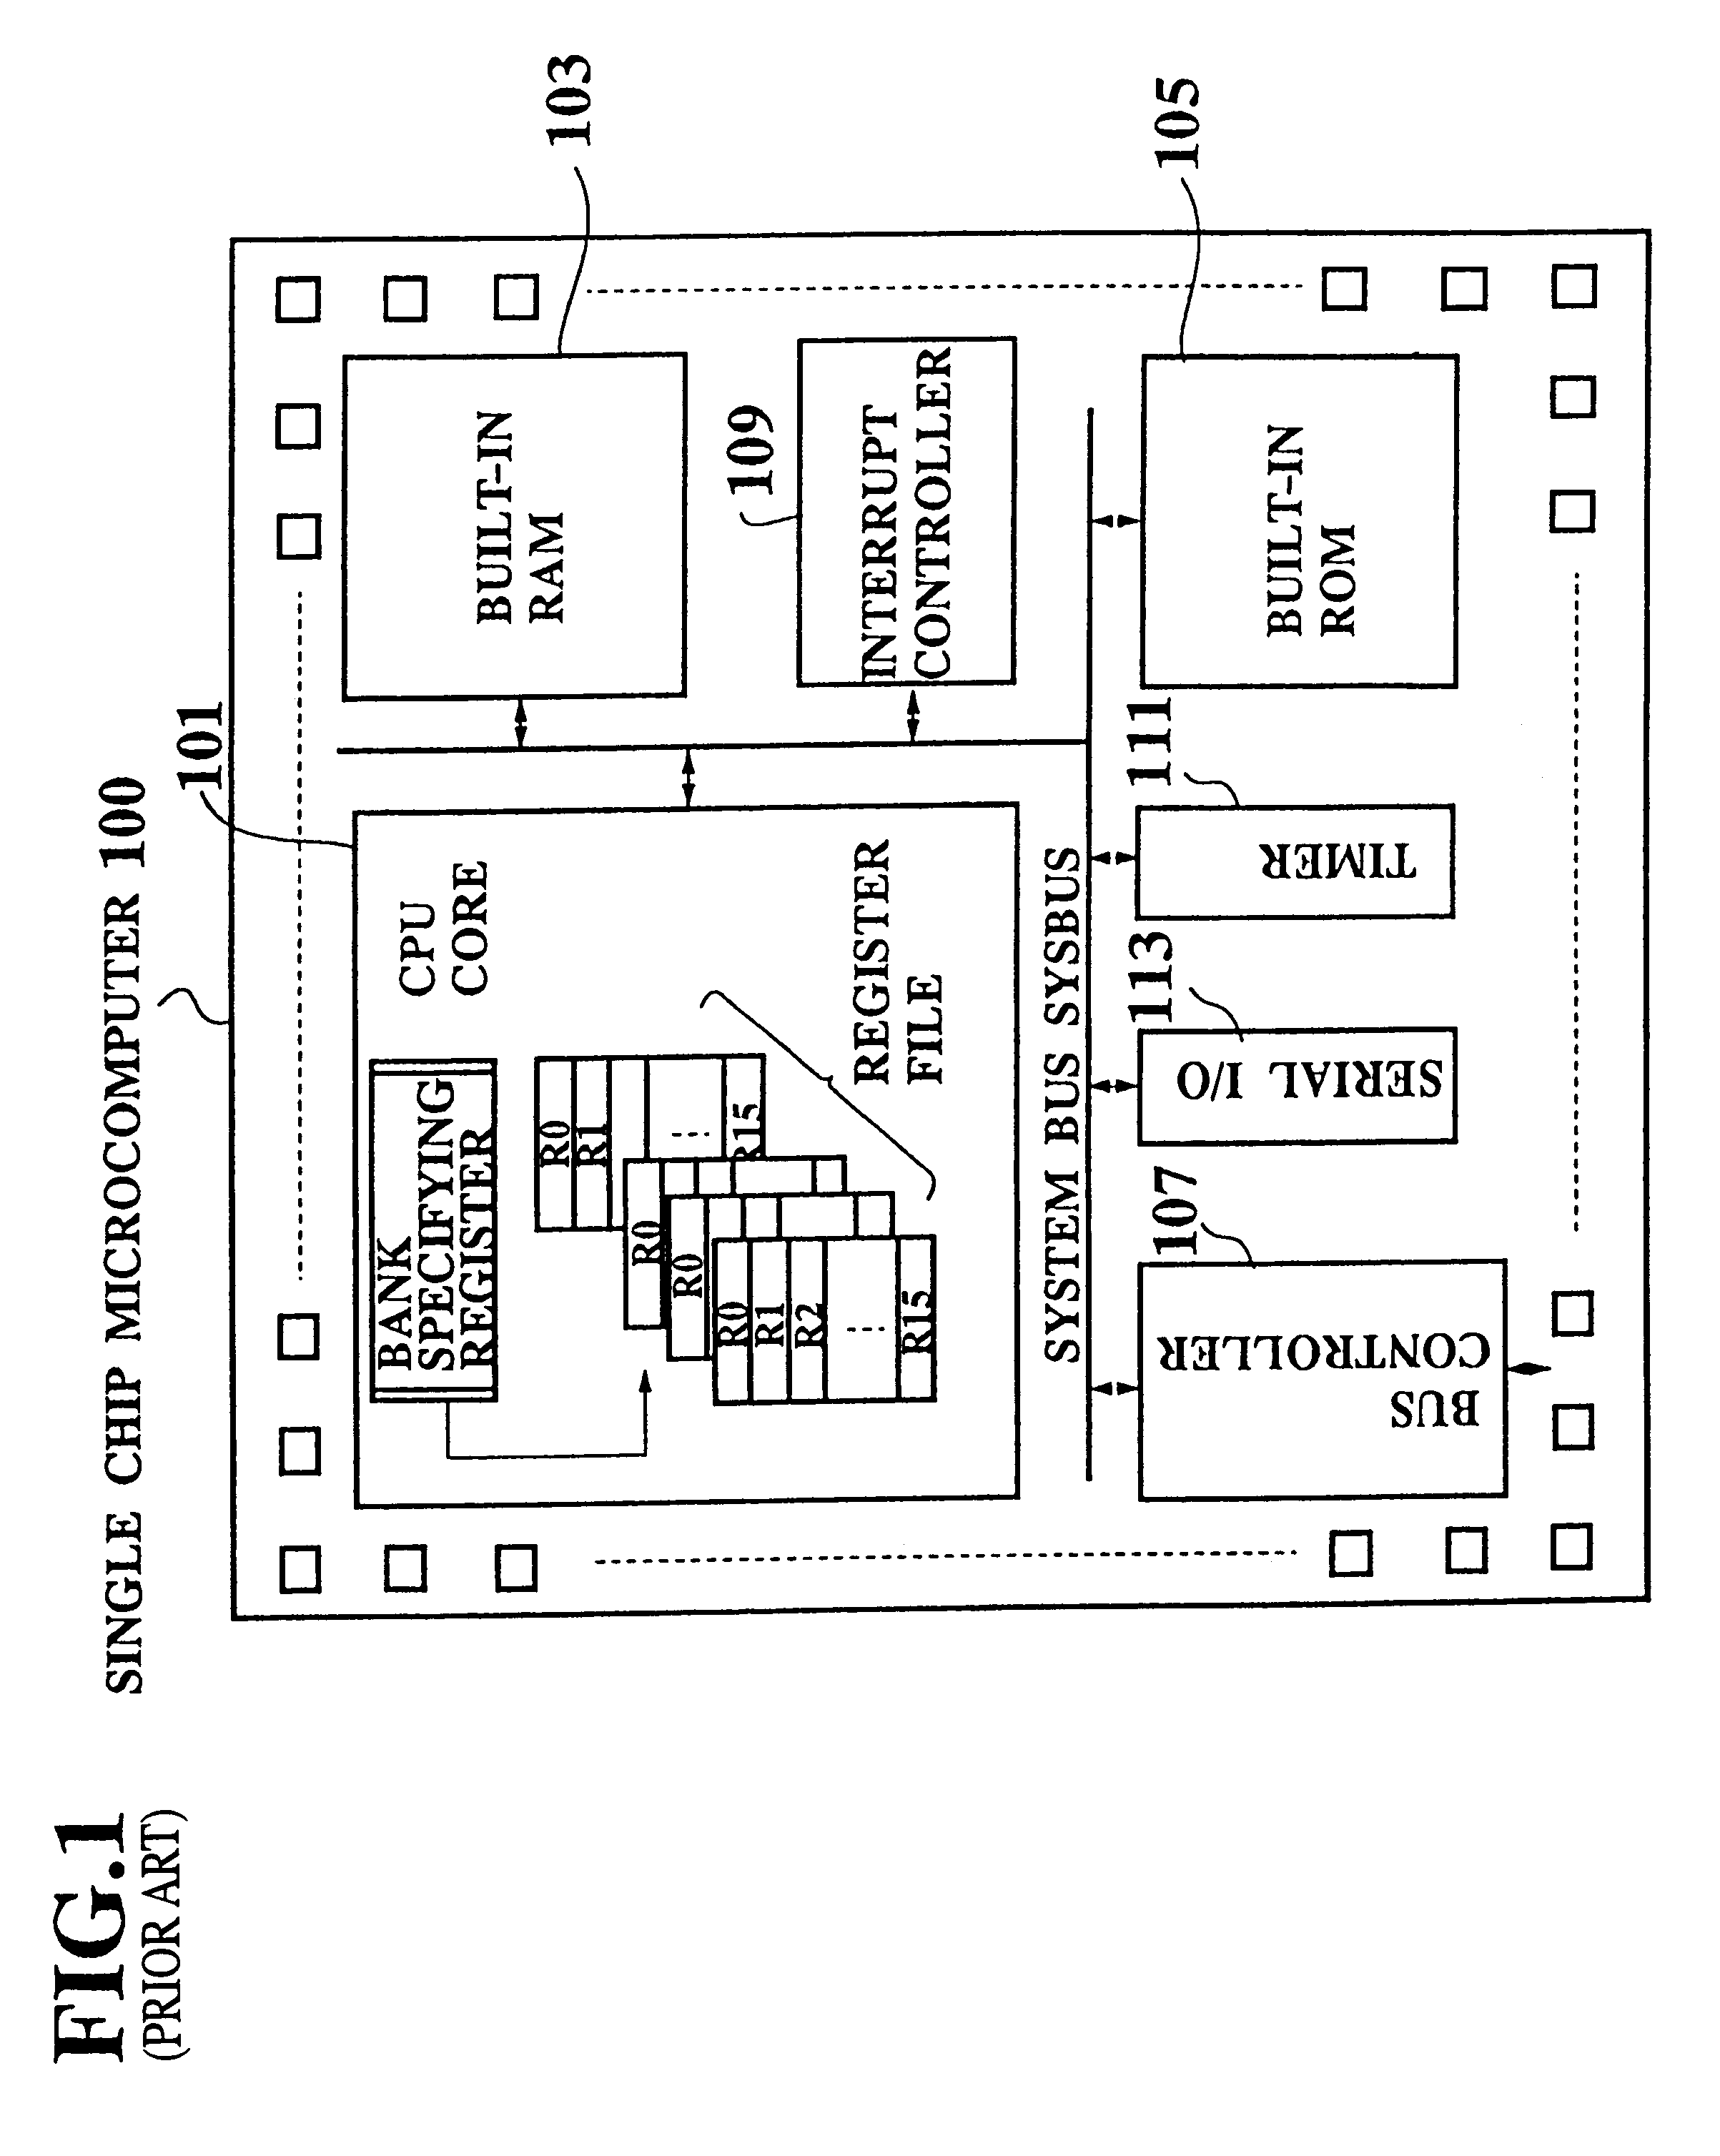 Single chip microcomputer having a dedicated address bus and dedicated data bus for transferring register bank data to and from an on-line RAM